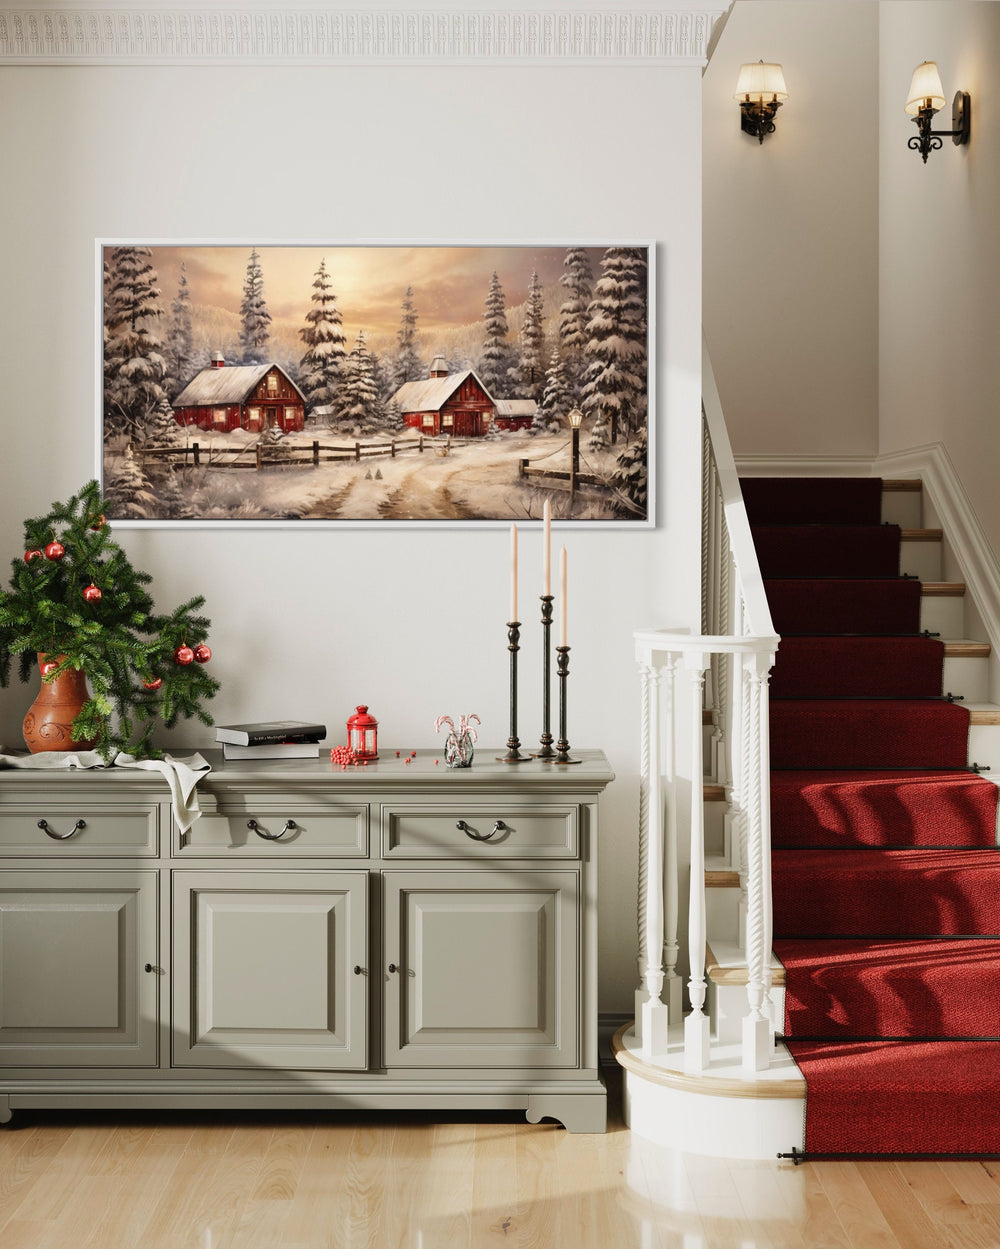 Farm Red Barn In Winter Canvas Wall Art "Winter Homestead" hanging in Christmas home